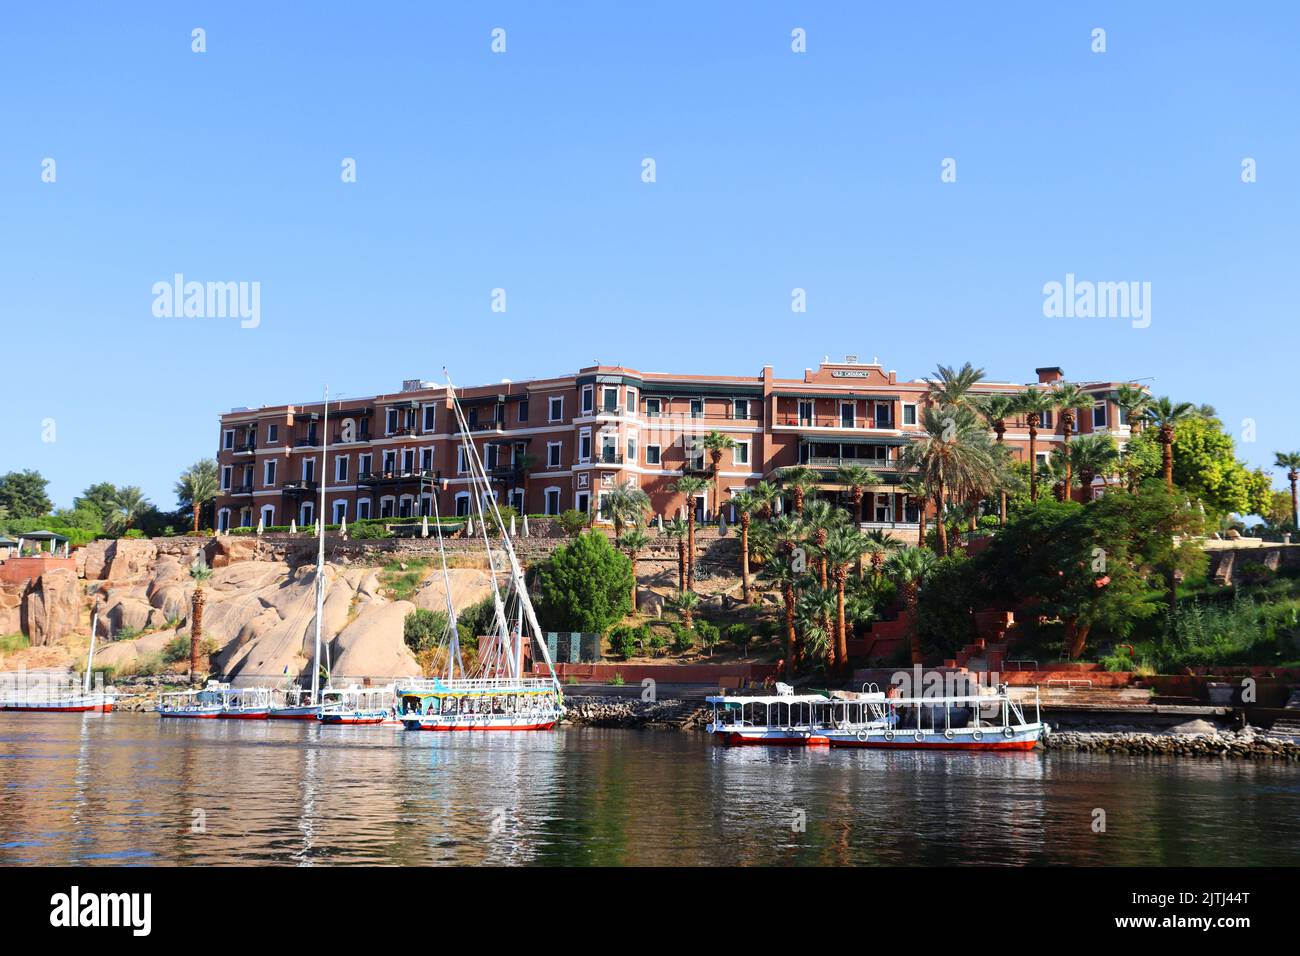 Old Cataract hotel on the eastern bank of river Nile in Aswan Stock Photo